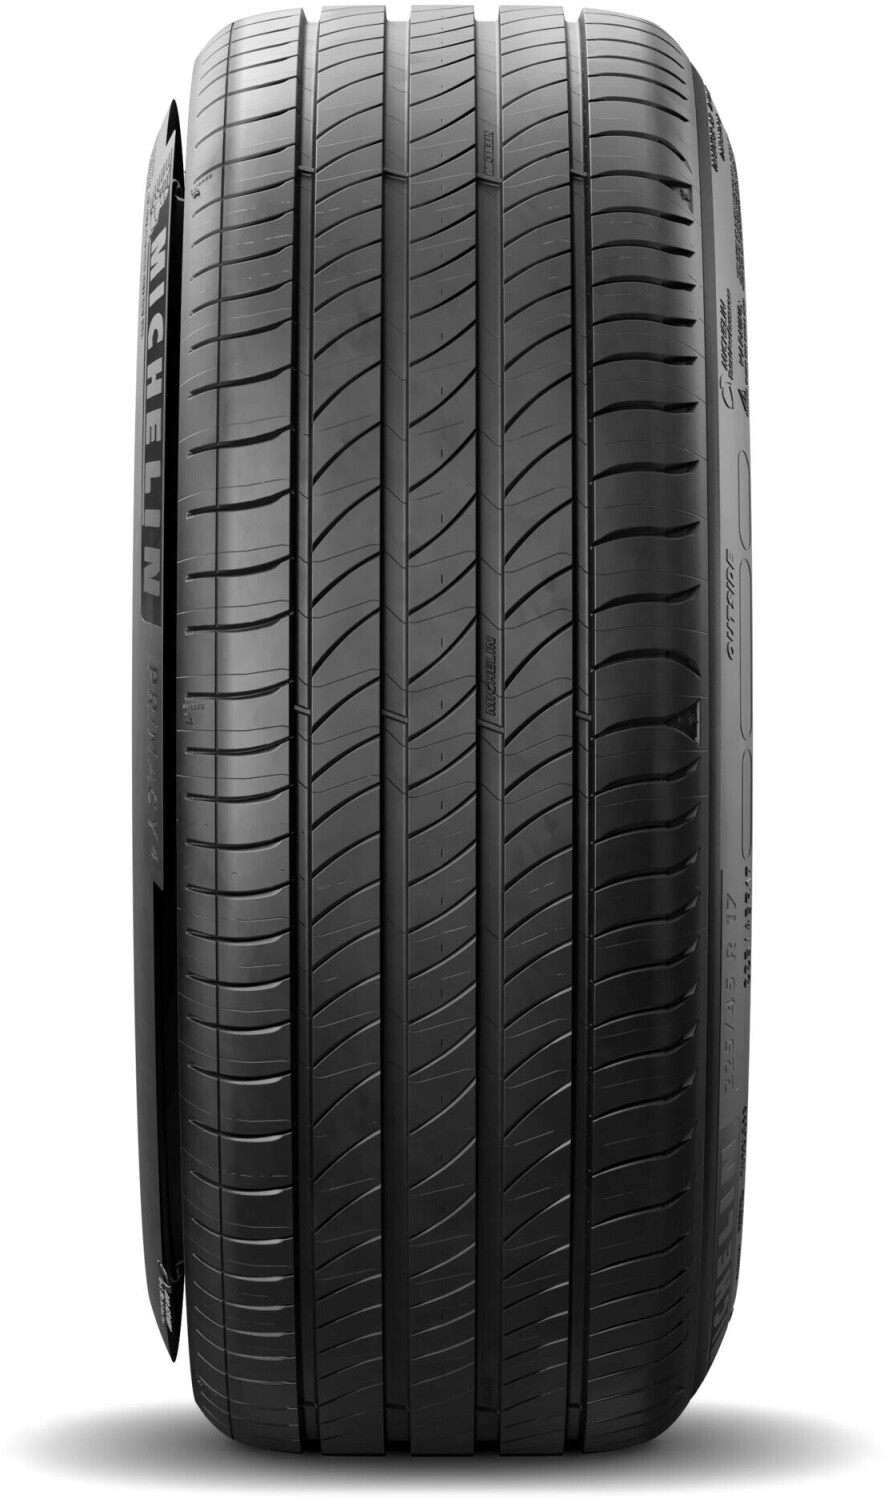 £108.51 94V (Today) Buy Deals Best Michelin Primacy – from 225/45 4 XL S1 R17 on